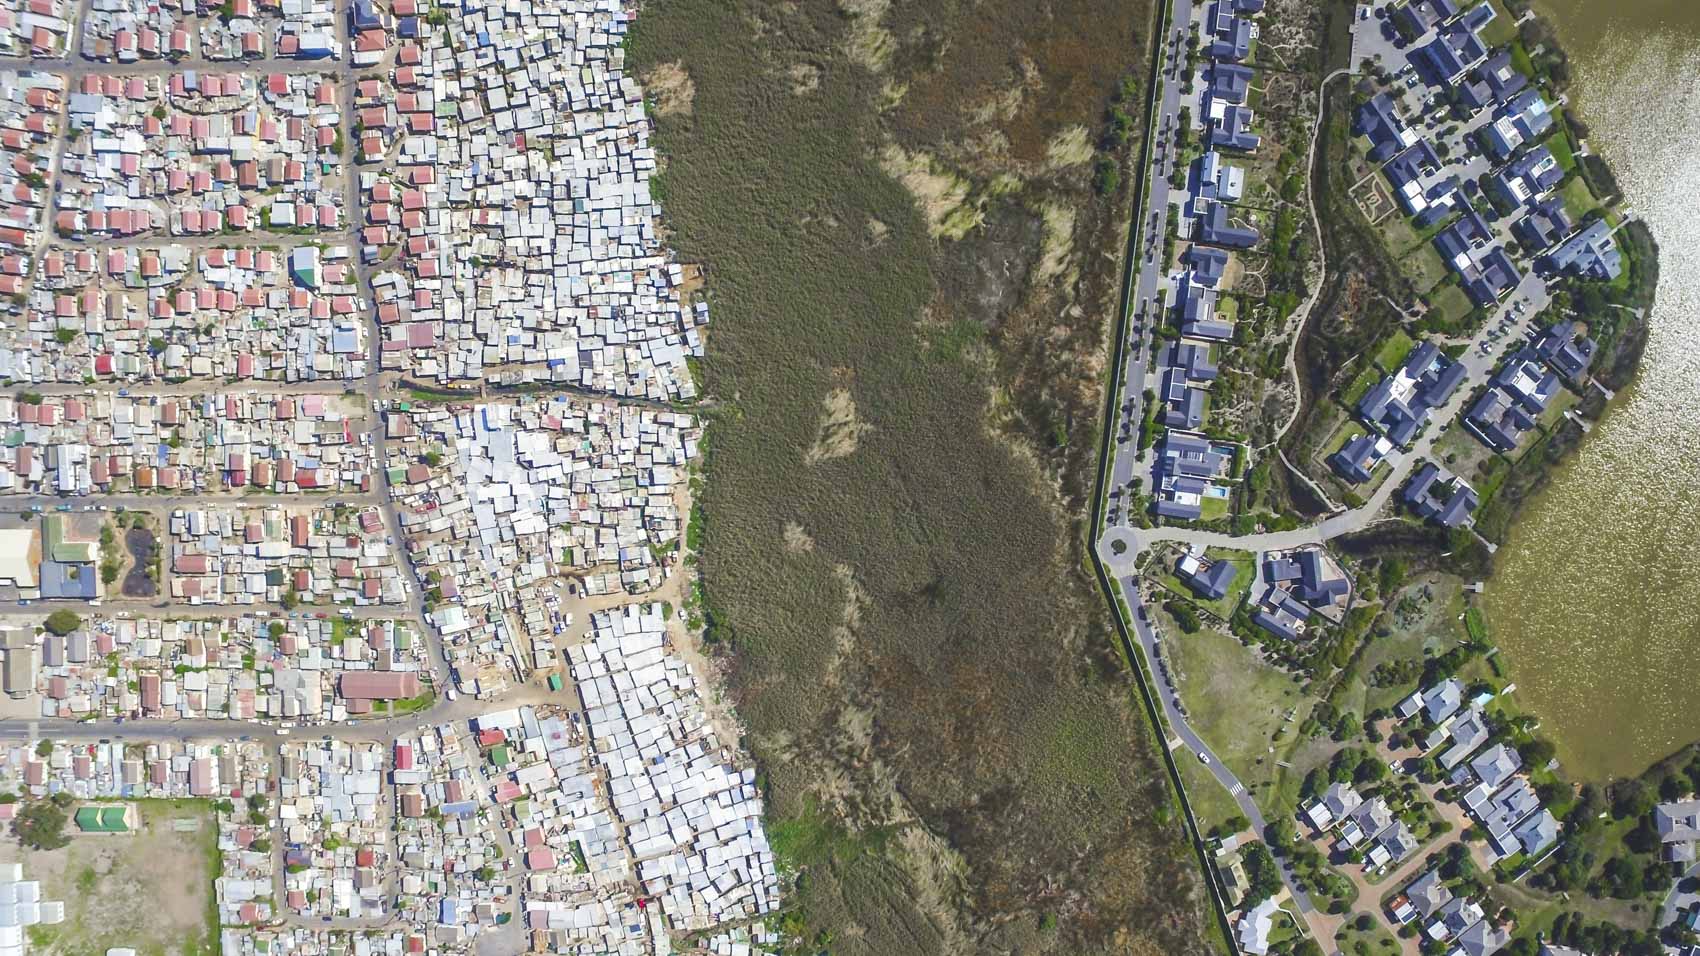 Powerful Aerial Photographs Illustrate Social Inequality in South Africa -  Resource Travel